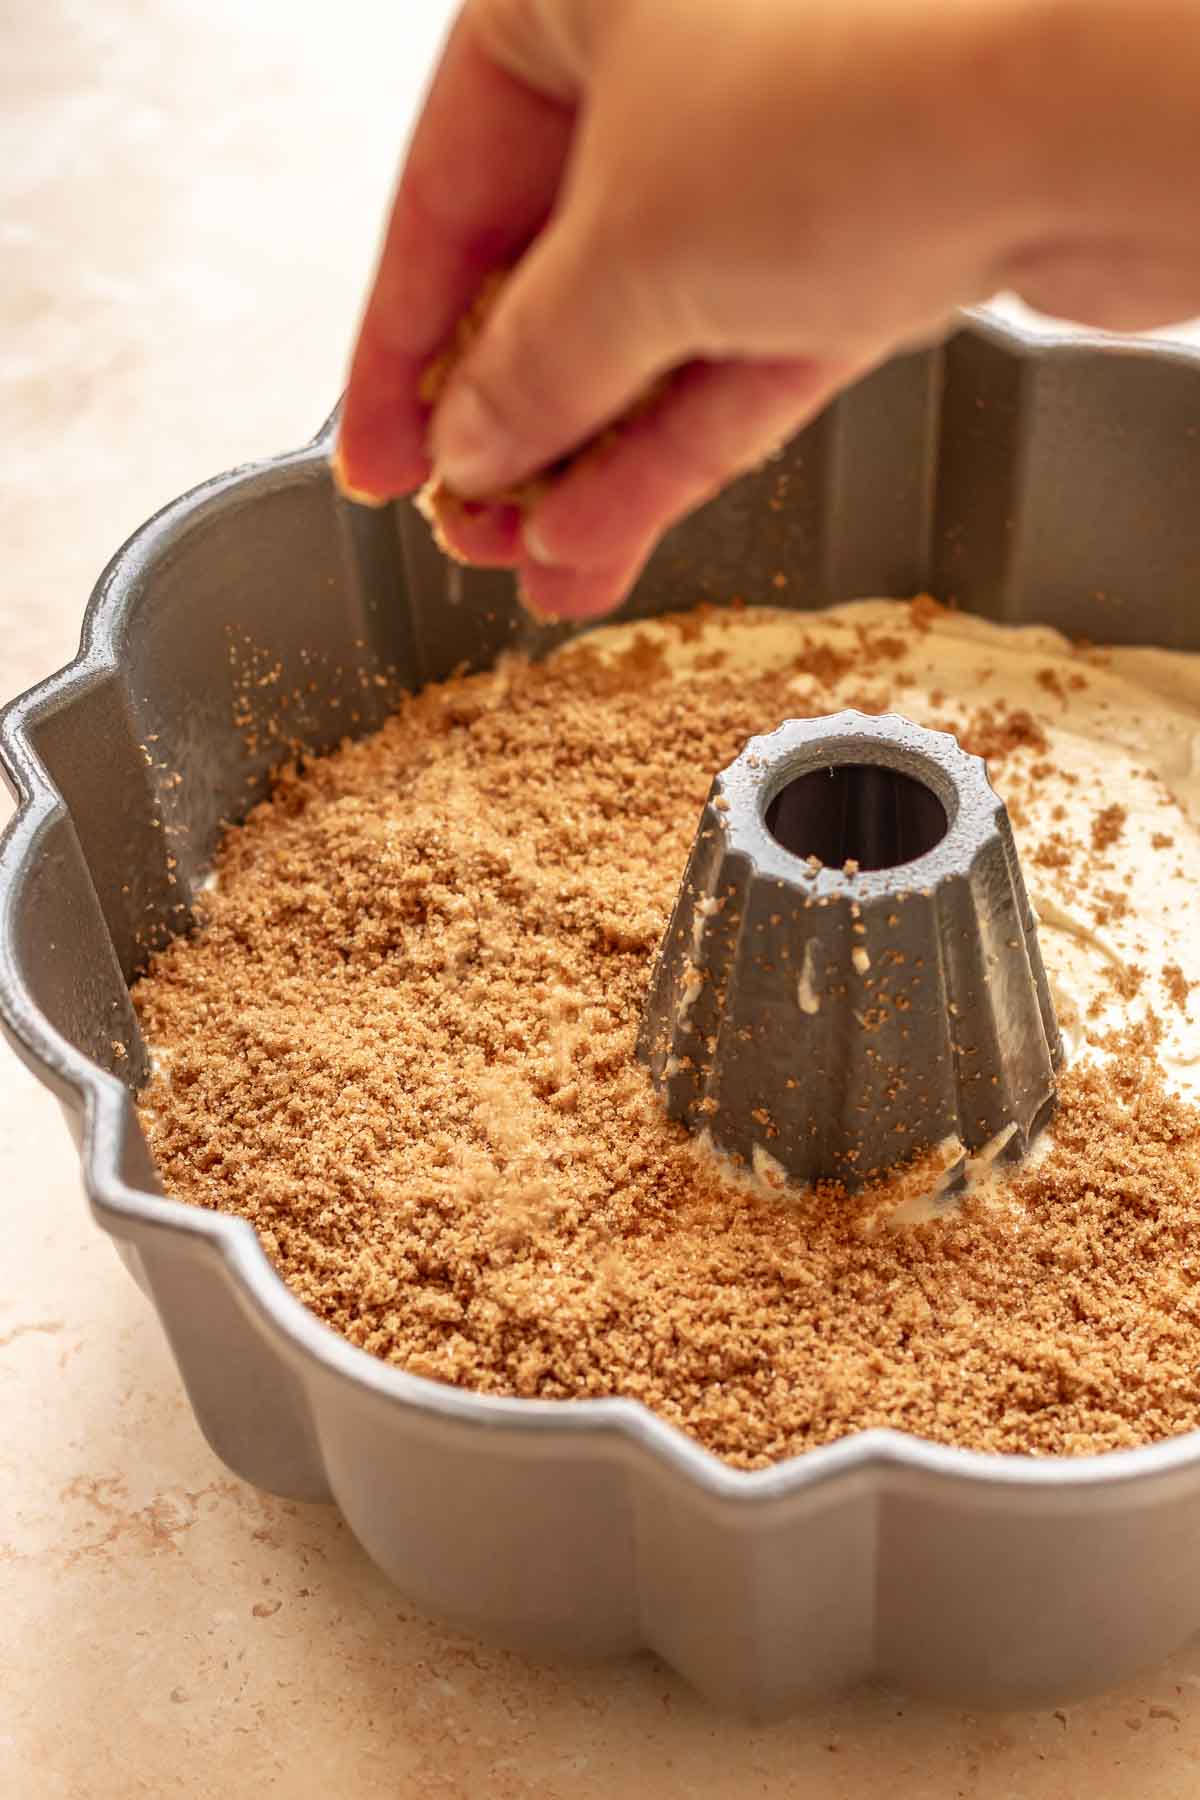 A hand adds cinnamon sugar to the top of the cake batter.